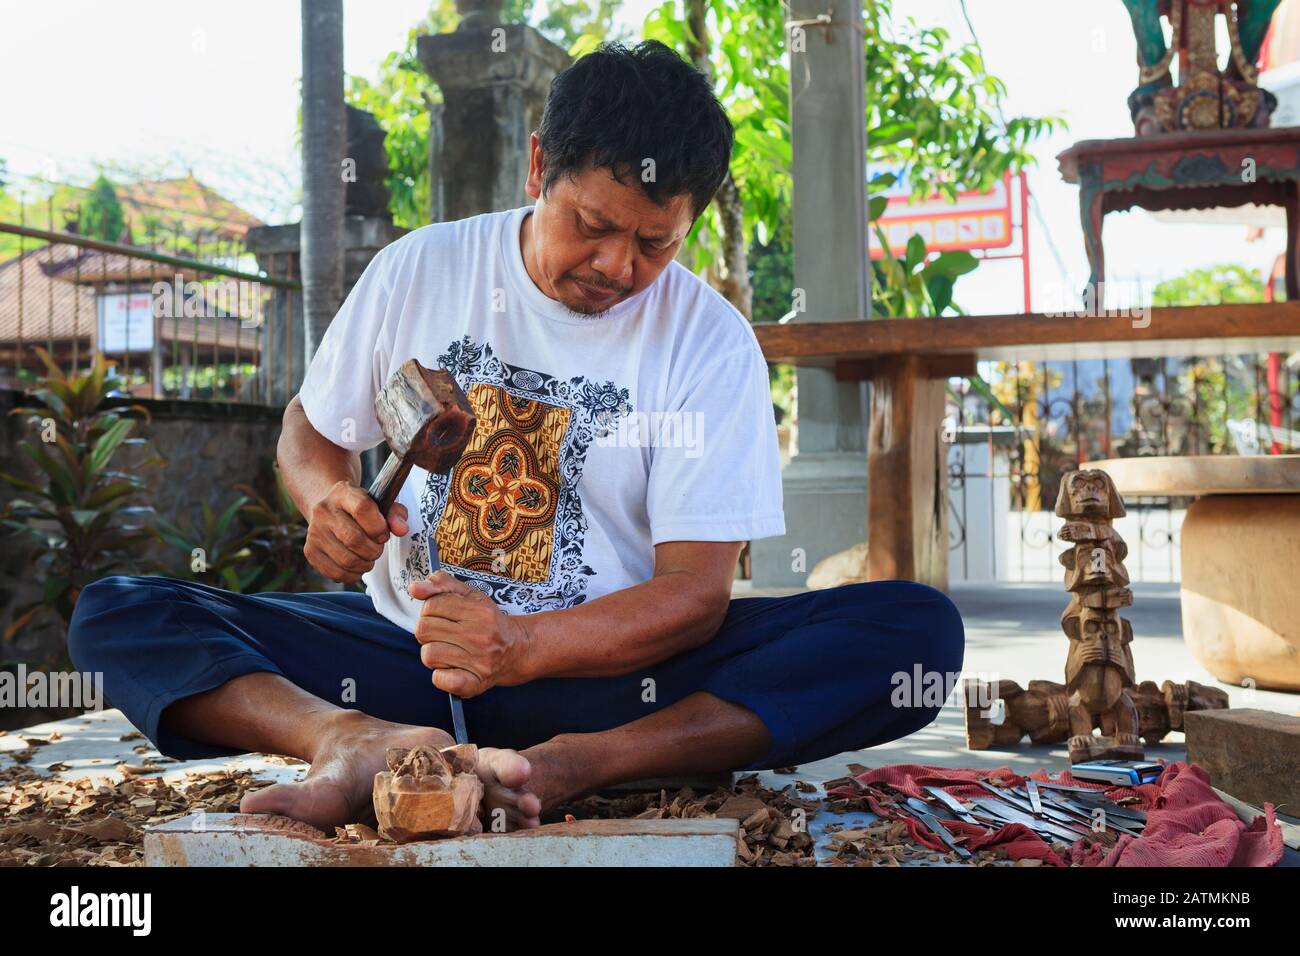 Ubud village, Bali Island, Indonesia - October 10, 2016: Balinese man working hard in wooden shop. Making traditional art souvenirs - carving by hands Stock Photo